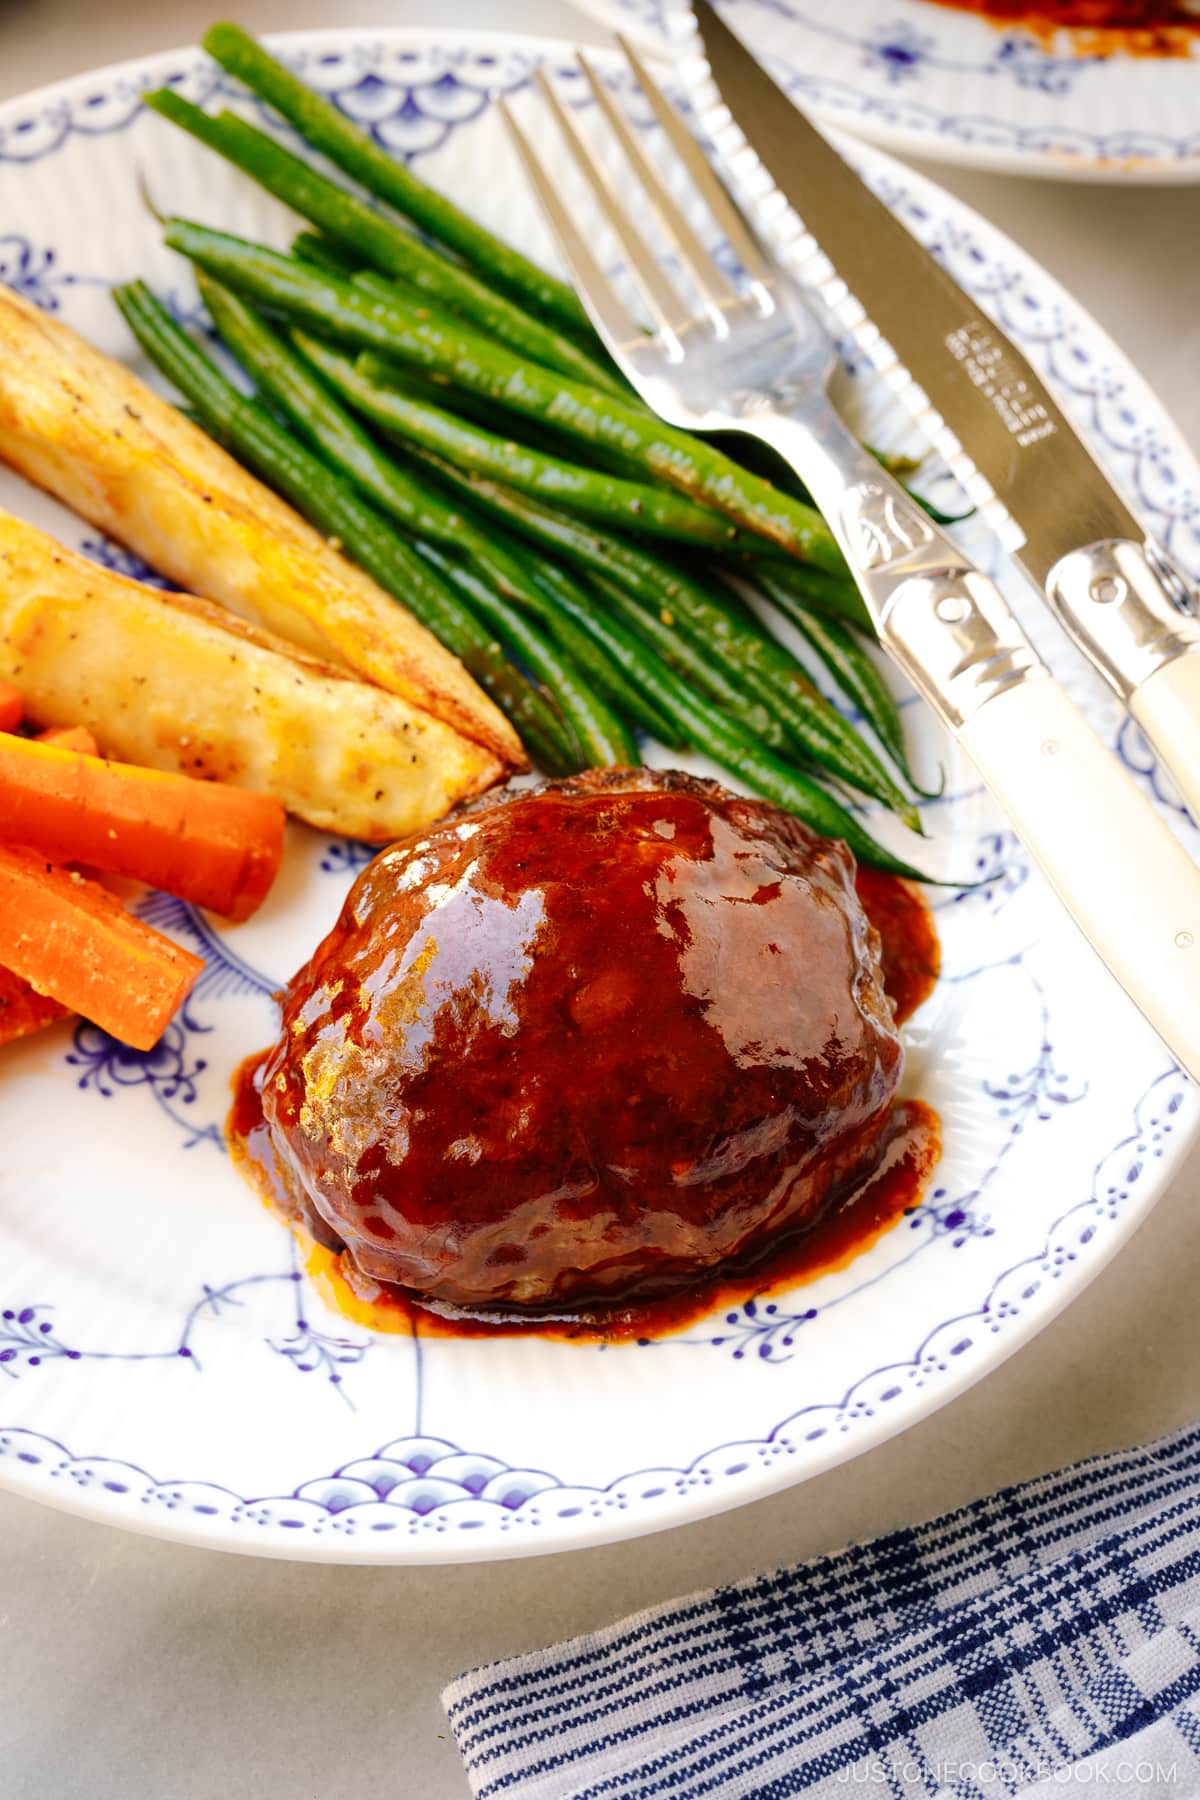 A white and blue plate containing Cheese Stuffed Japanese Hamburger Steak (Hambagu) stuffed with cheese and slathered in demi-glace sauce.